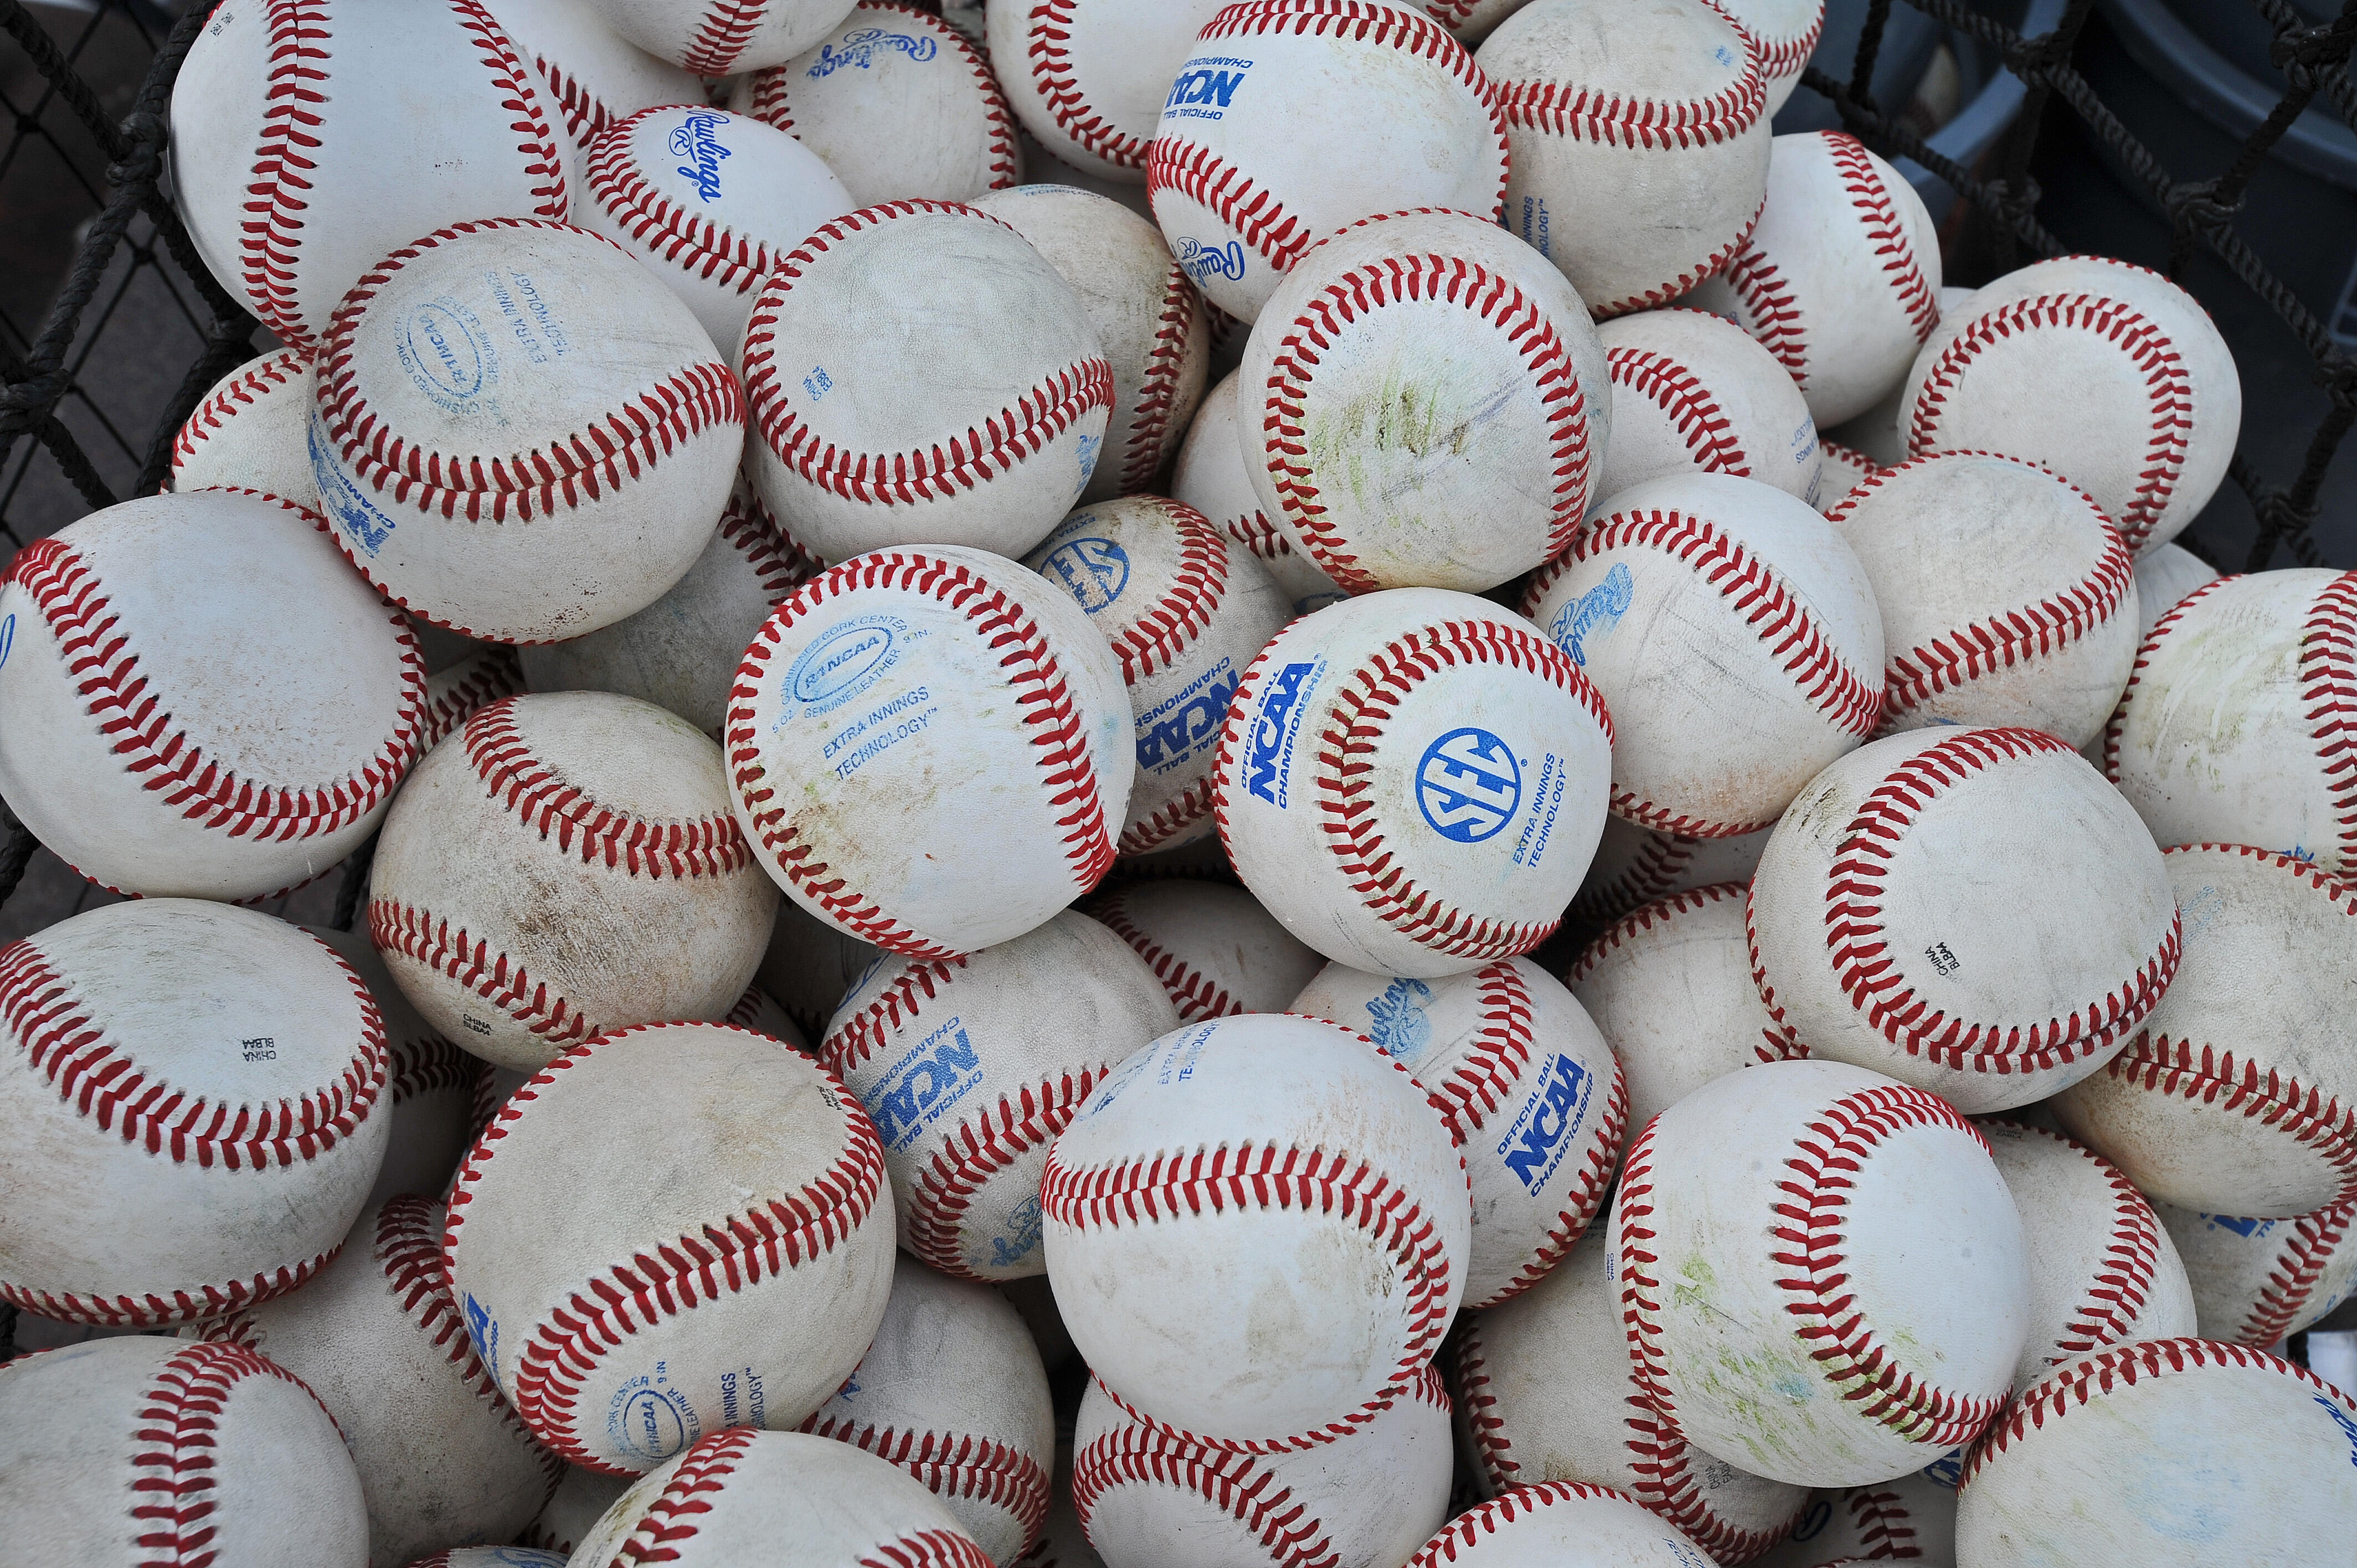 OMAHA, NE - JUNE 23:  A general view of baseballs before game one of the College World Series Championship between the Vanderbilt Commodores and the Virginia Cavaliers on June 23, 2014 at TD Ameritrade Park in Omaha, Nebraska.  (Photo by Peter Aiken/Getty